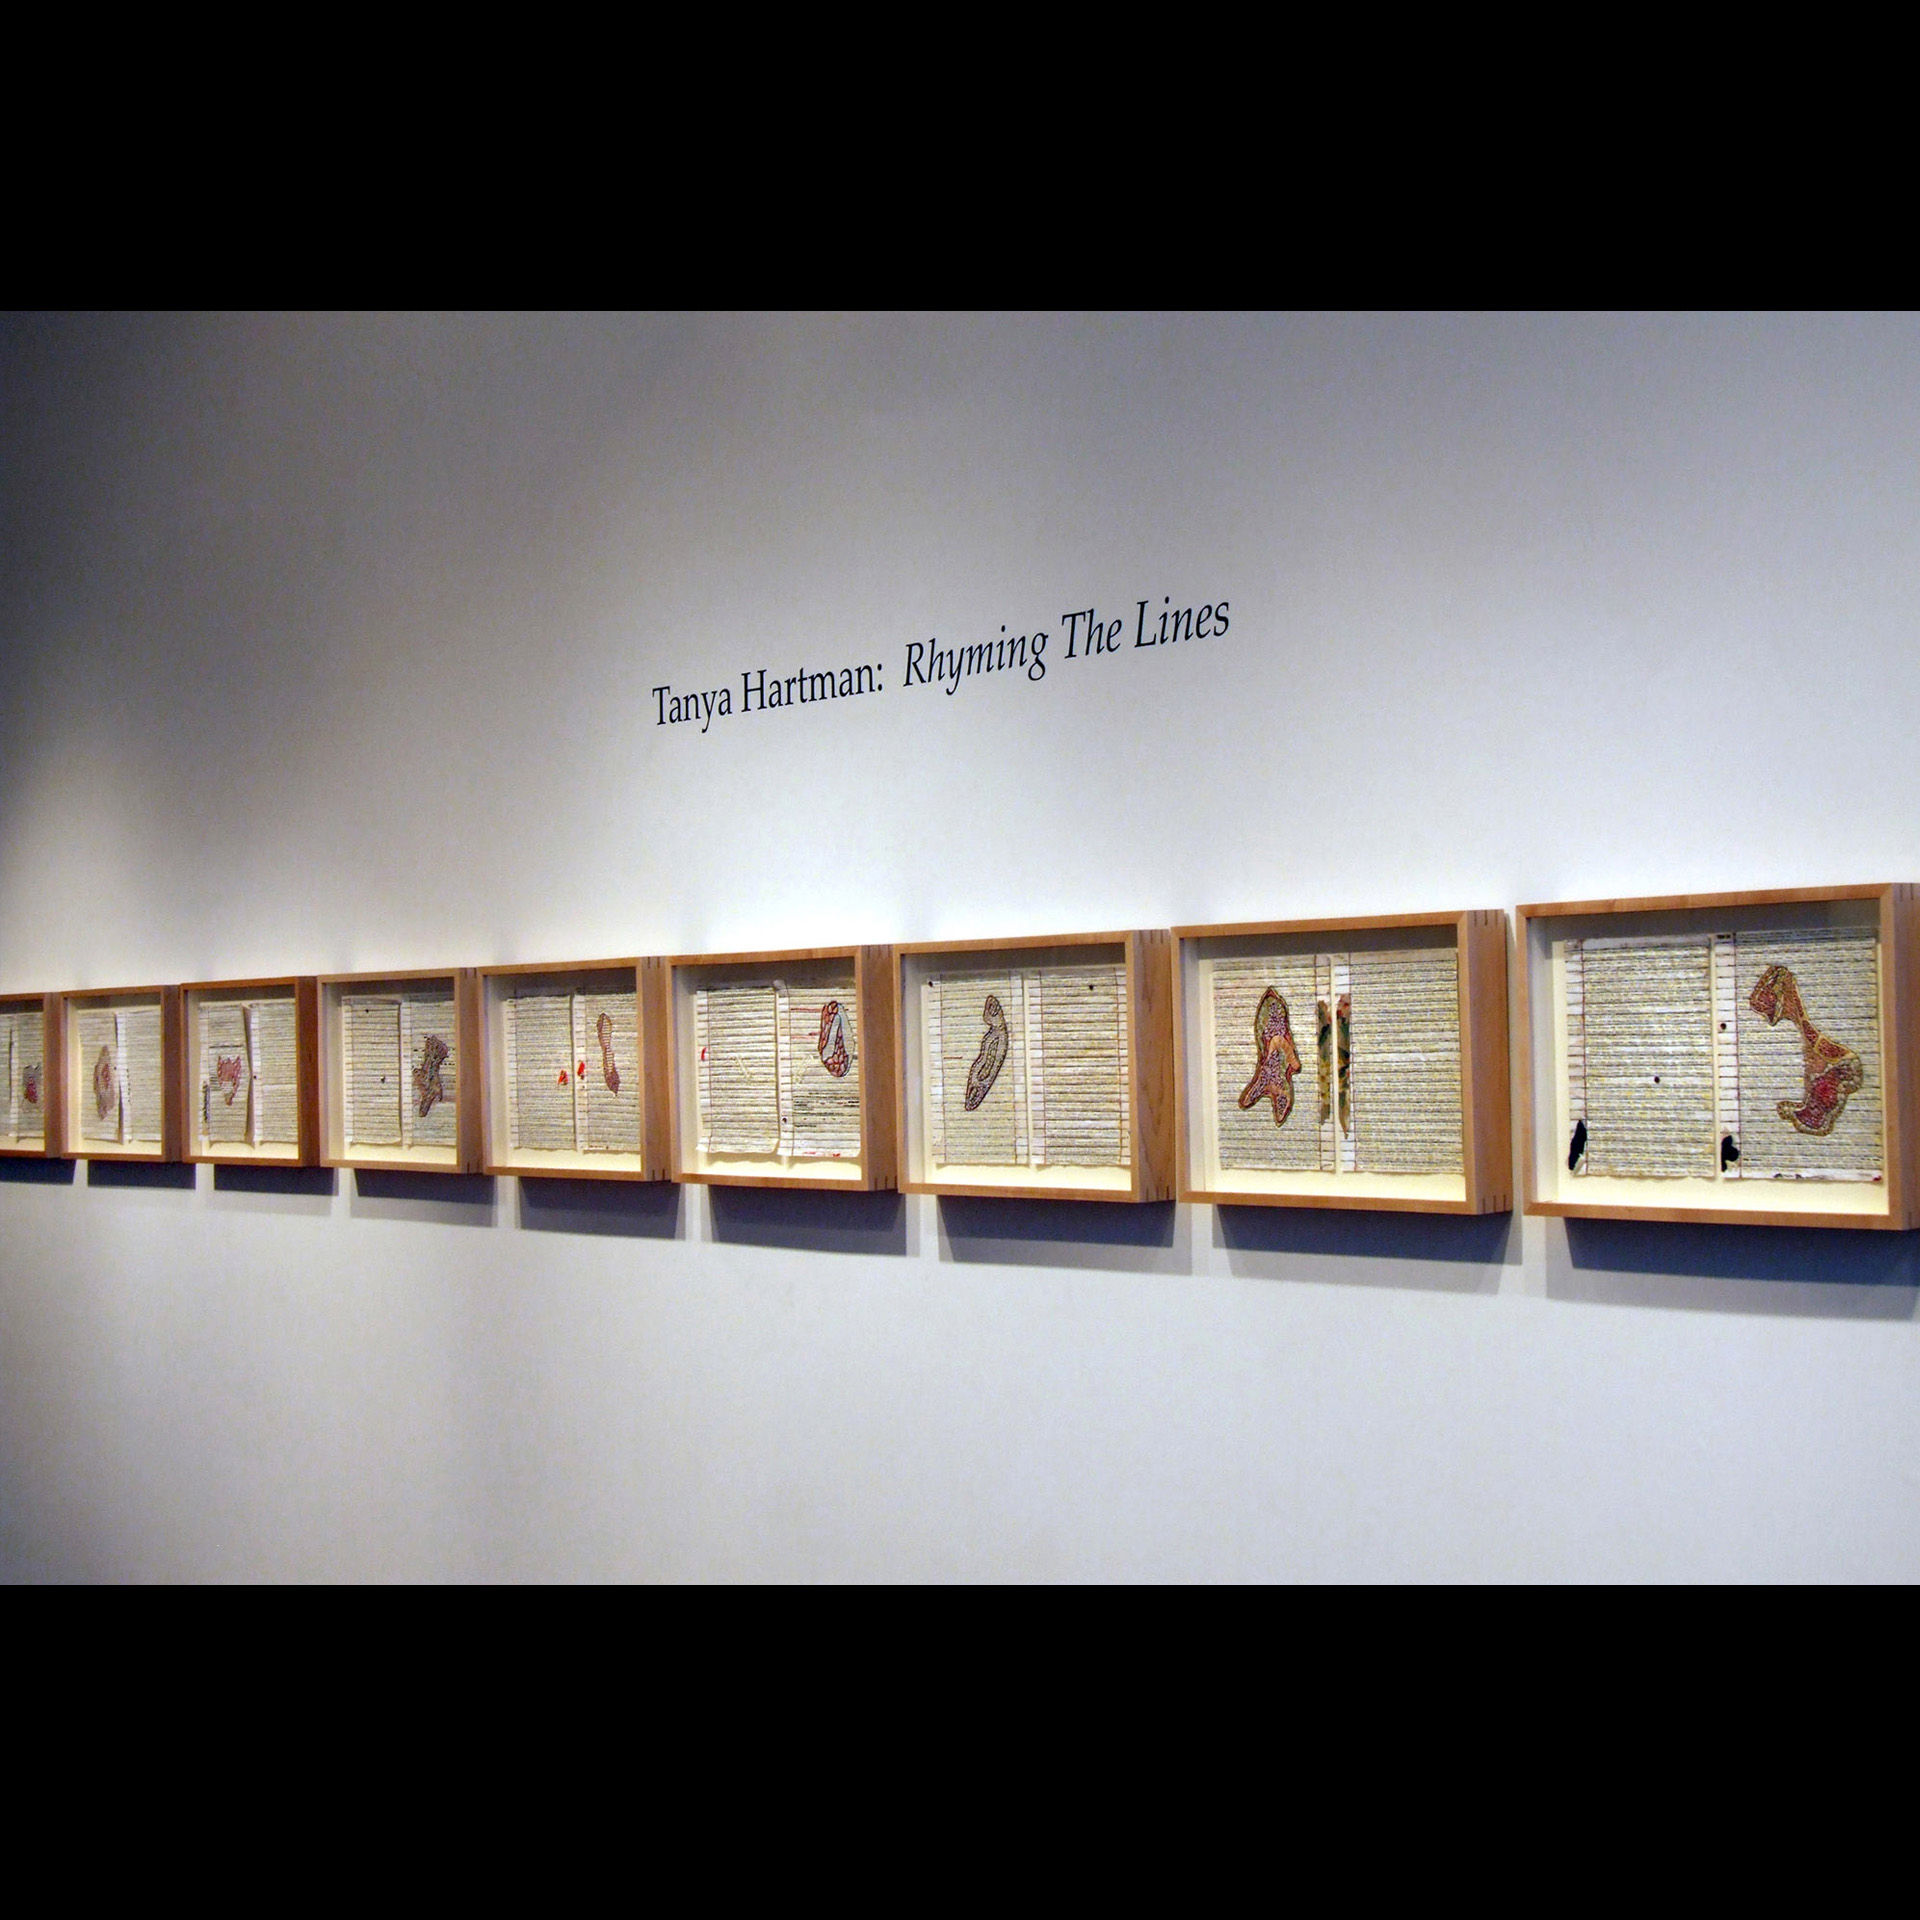  Rhyming The Lines, (installation view) mixed media, 12 framed works, 19 inches by 27 inches each, 2003-2010. 